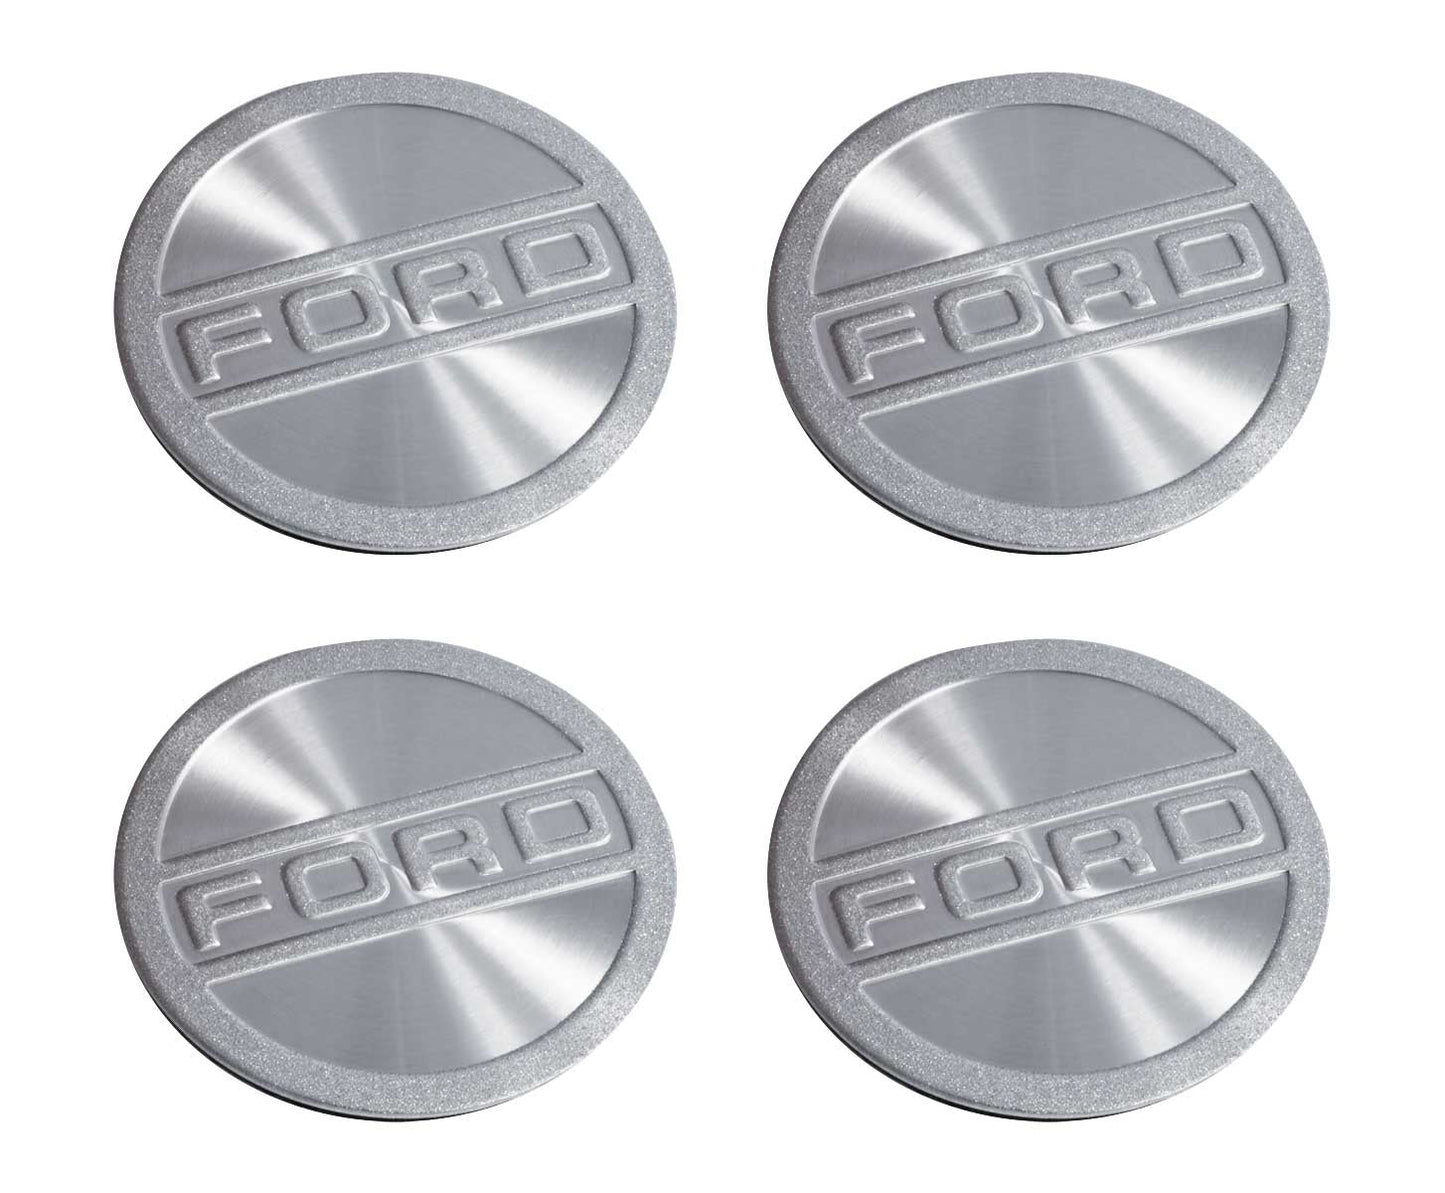 2018-2023 Mustang GT & Ecoboost 5pc Billet Engine Cap Covers Set w/ Ford Inserts